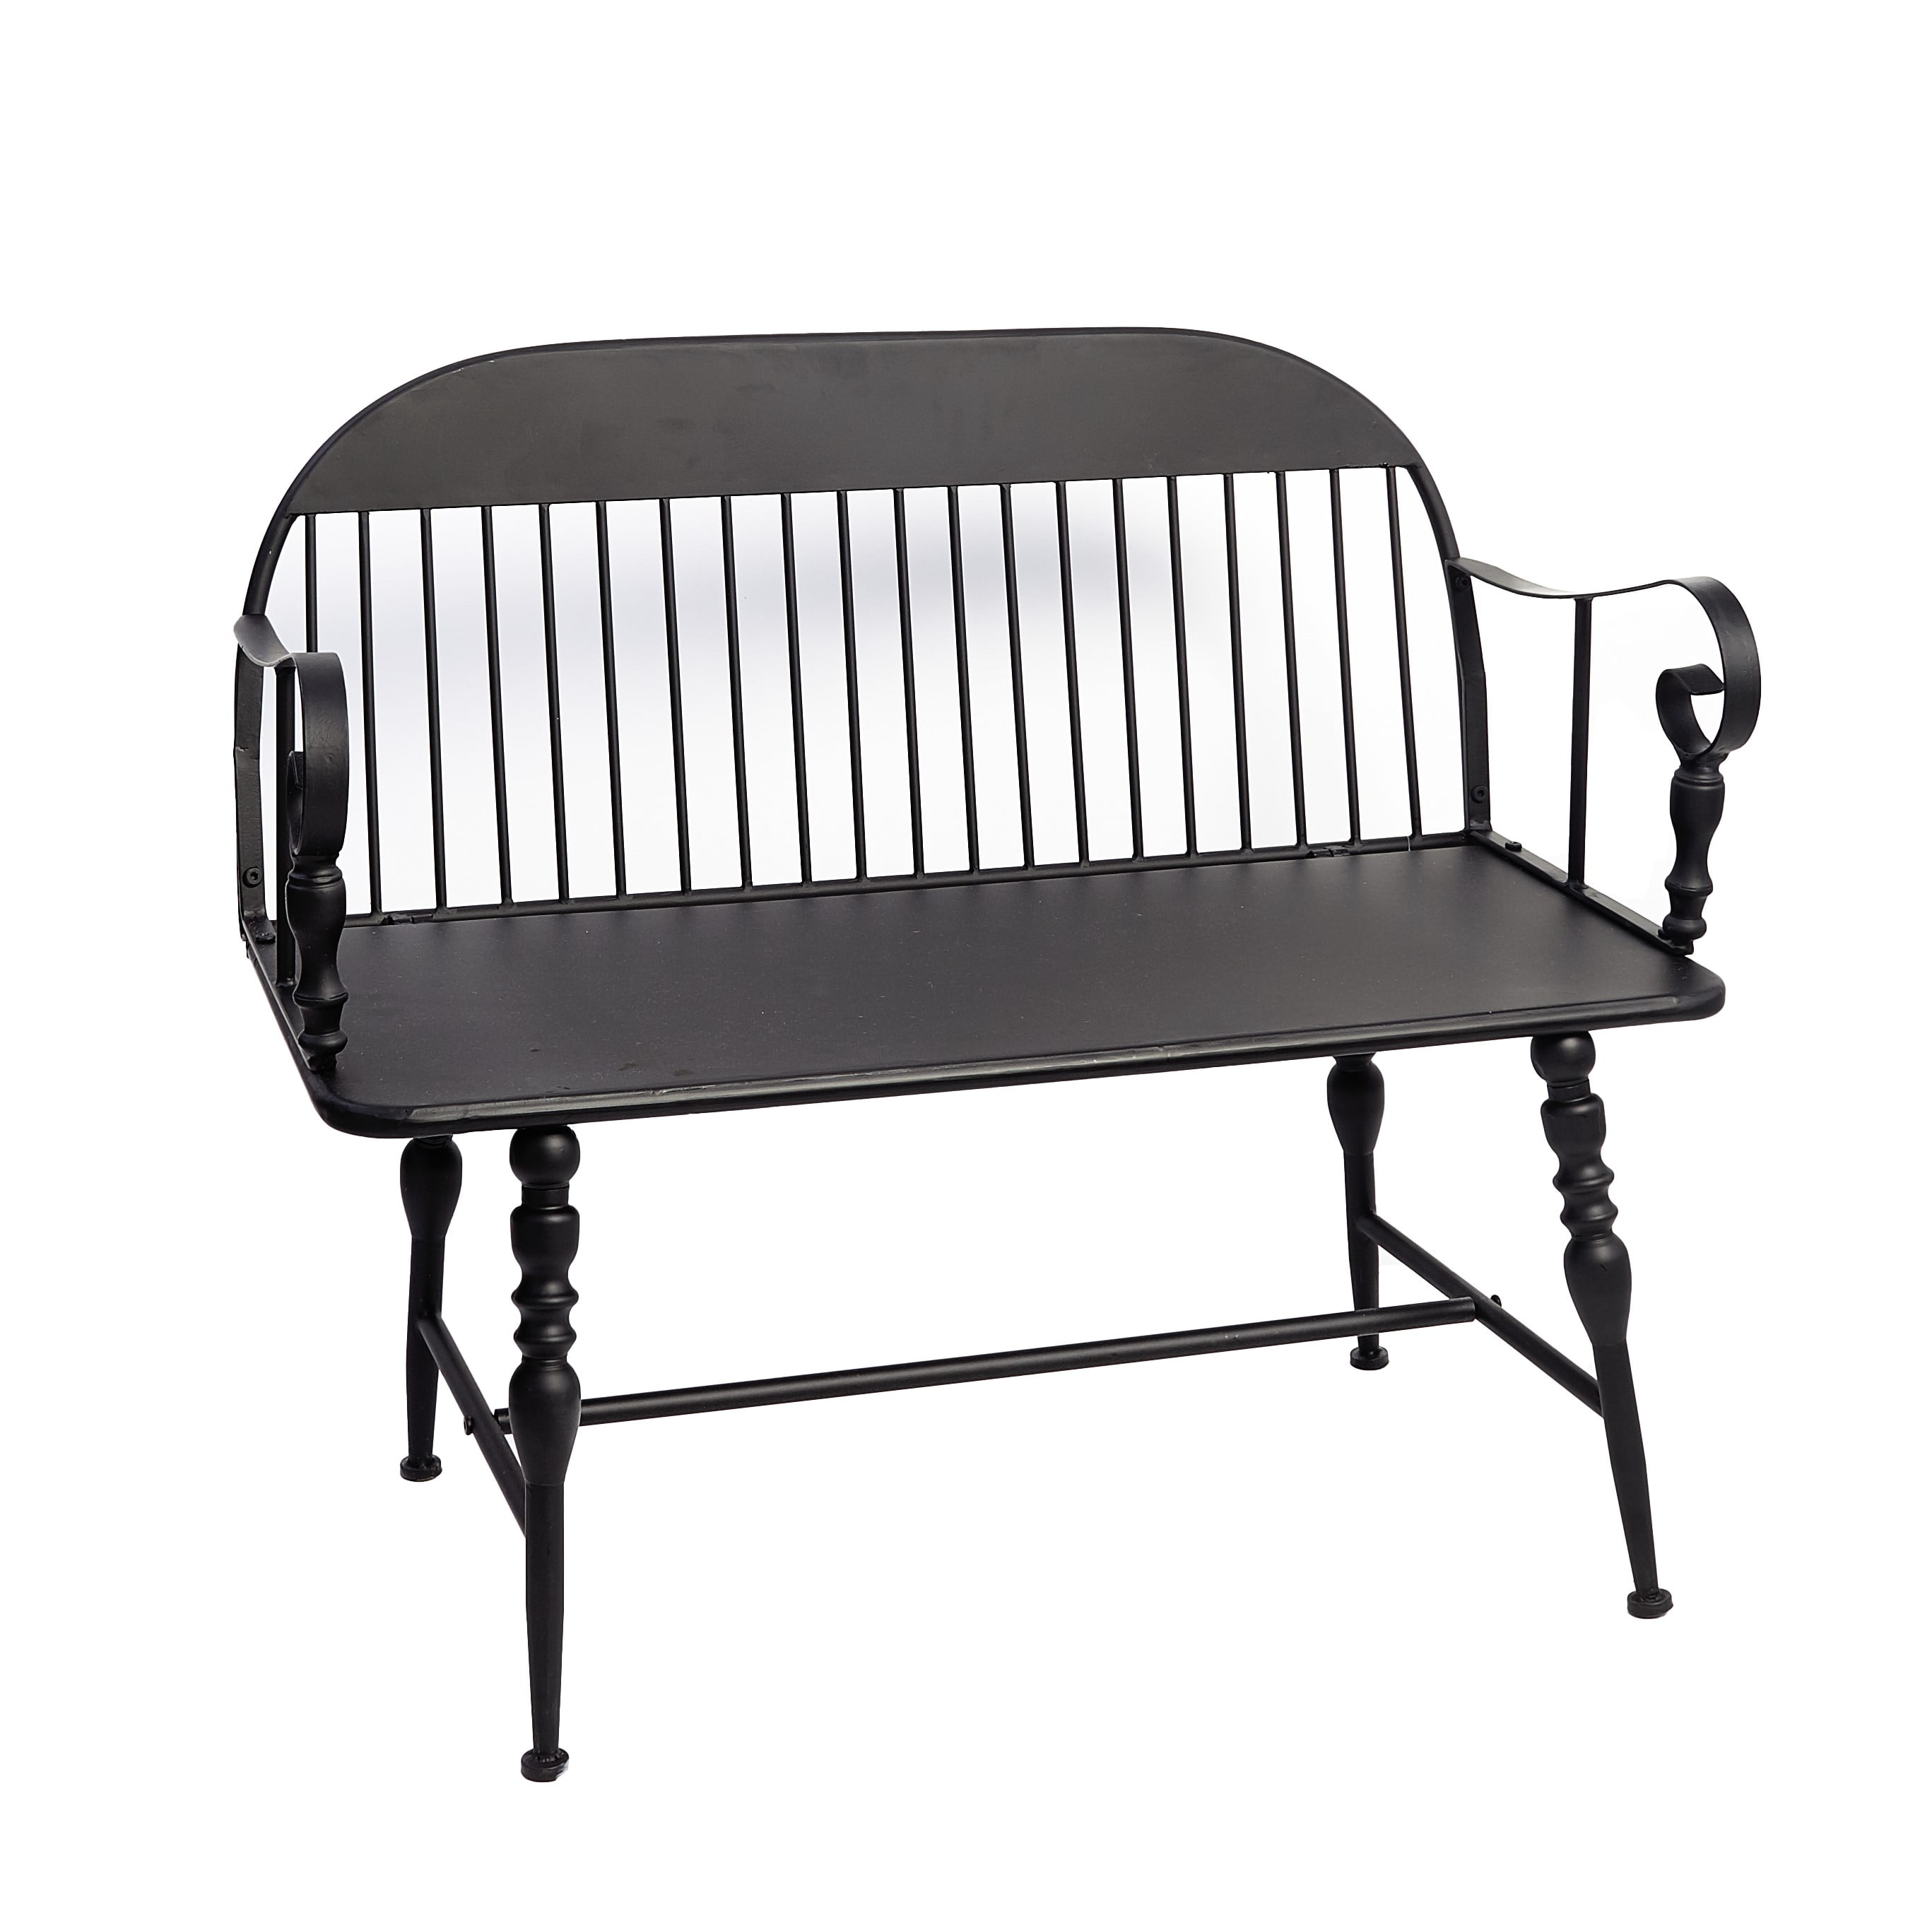 Black Farmhouse Outdoor Metal Bench With Spindle Legs And Curved